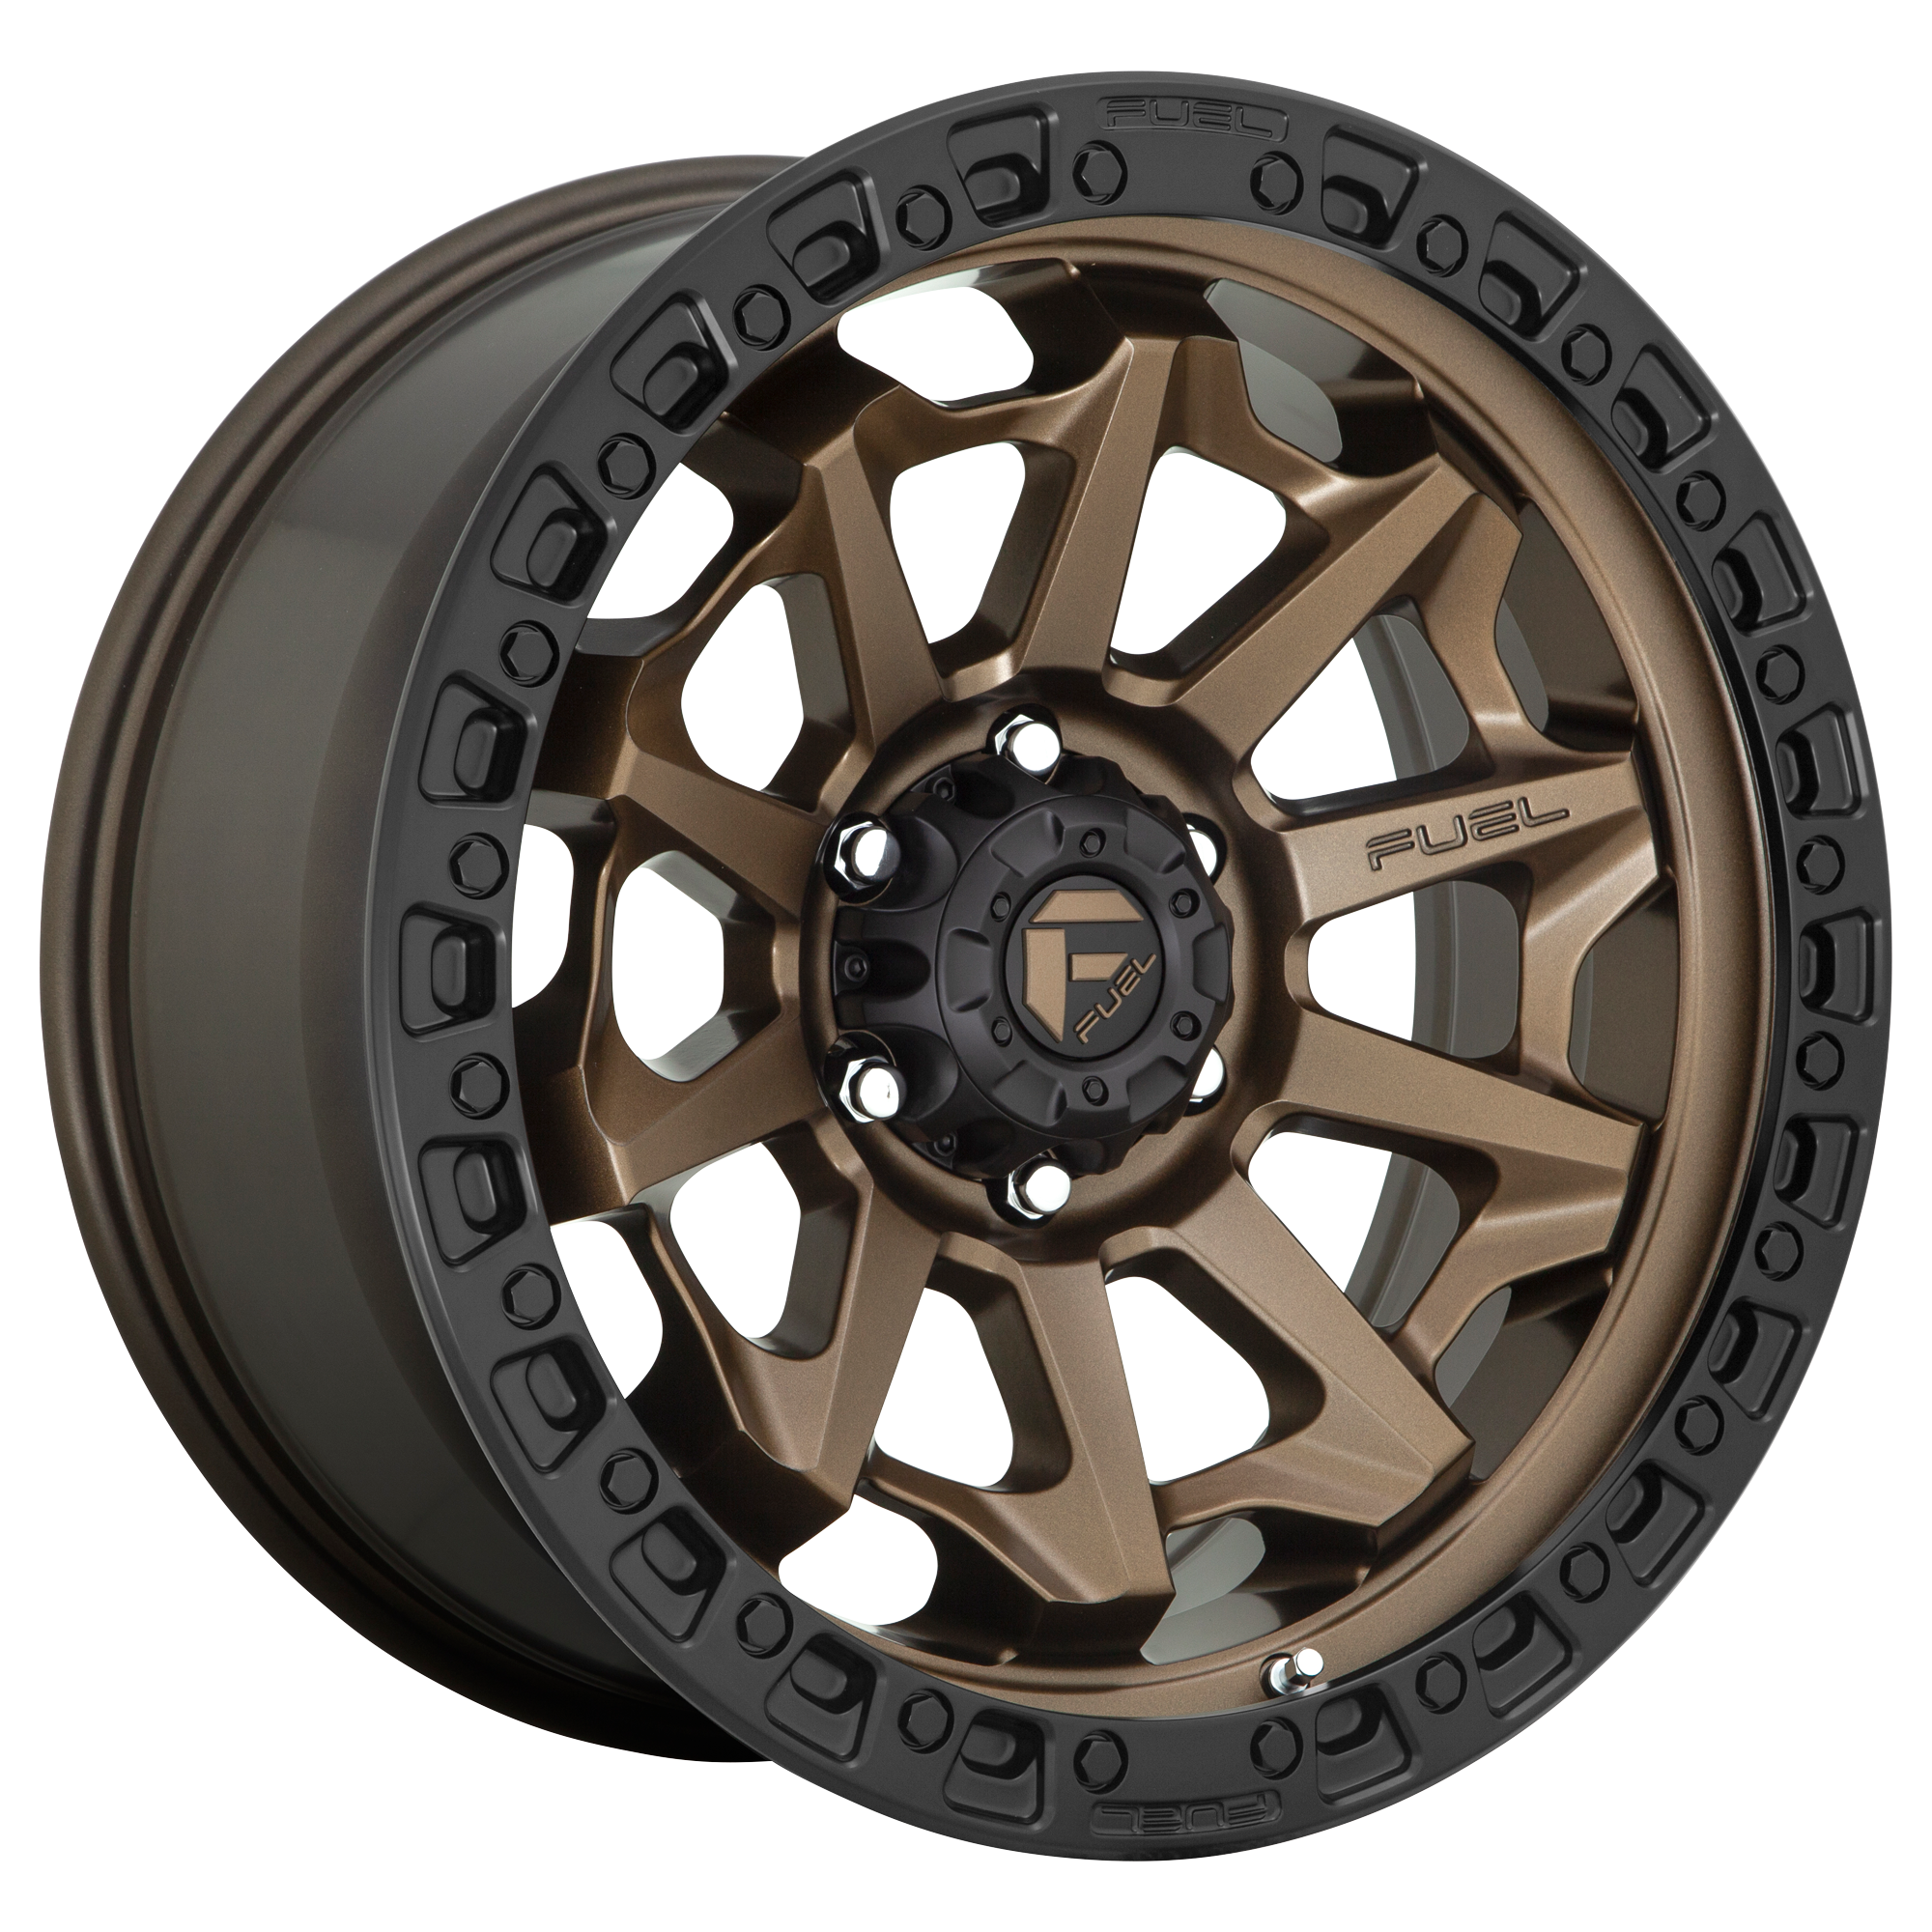 COVERT 18x9 5x139.70 MATTE BRONZE BLACK BEAD RING (1 mm) - Tires and Engine Performance